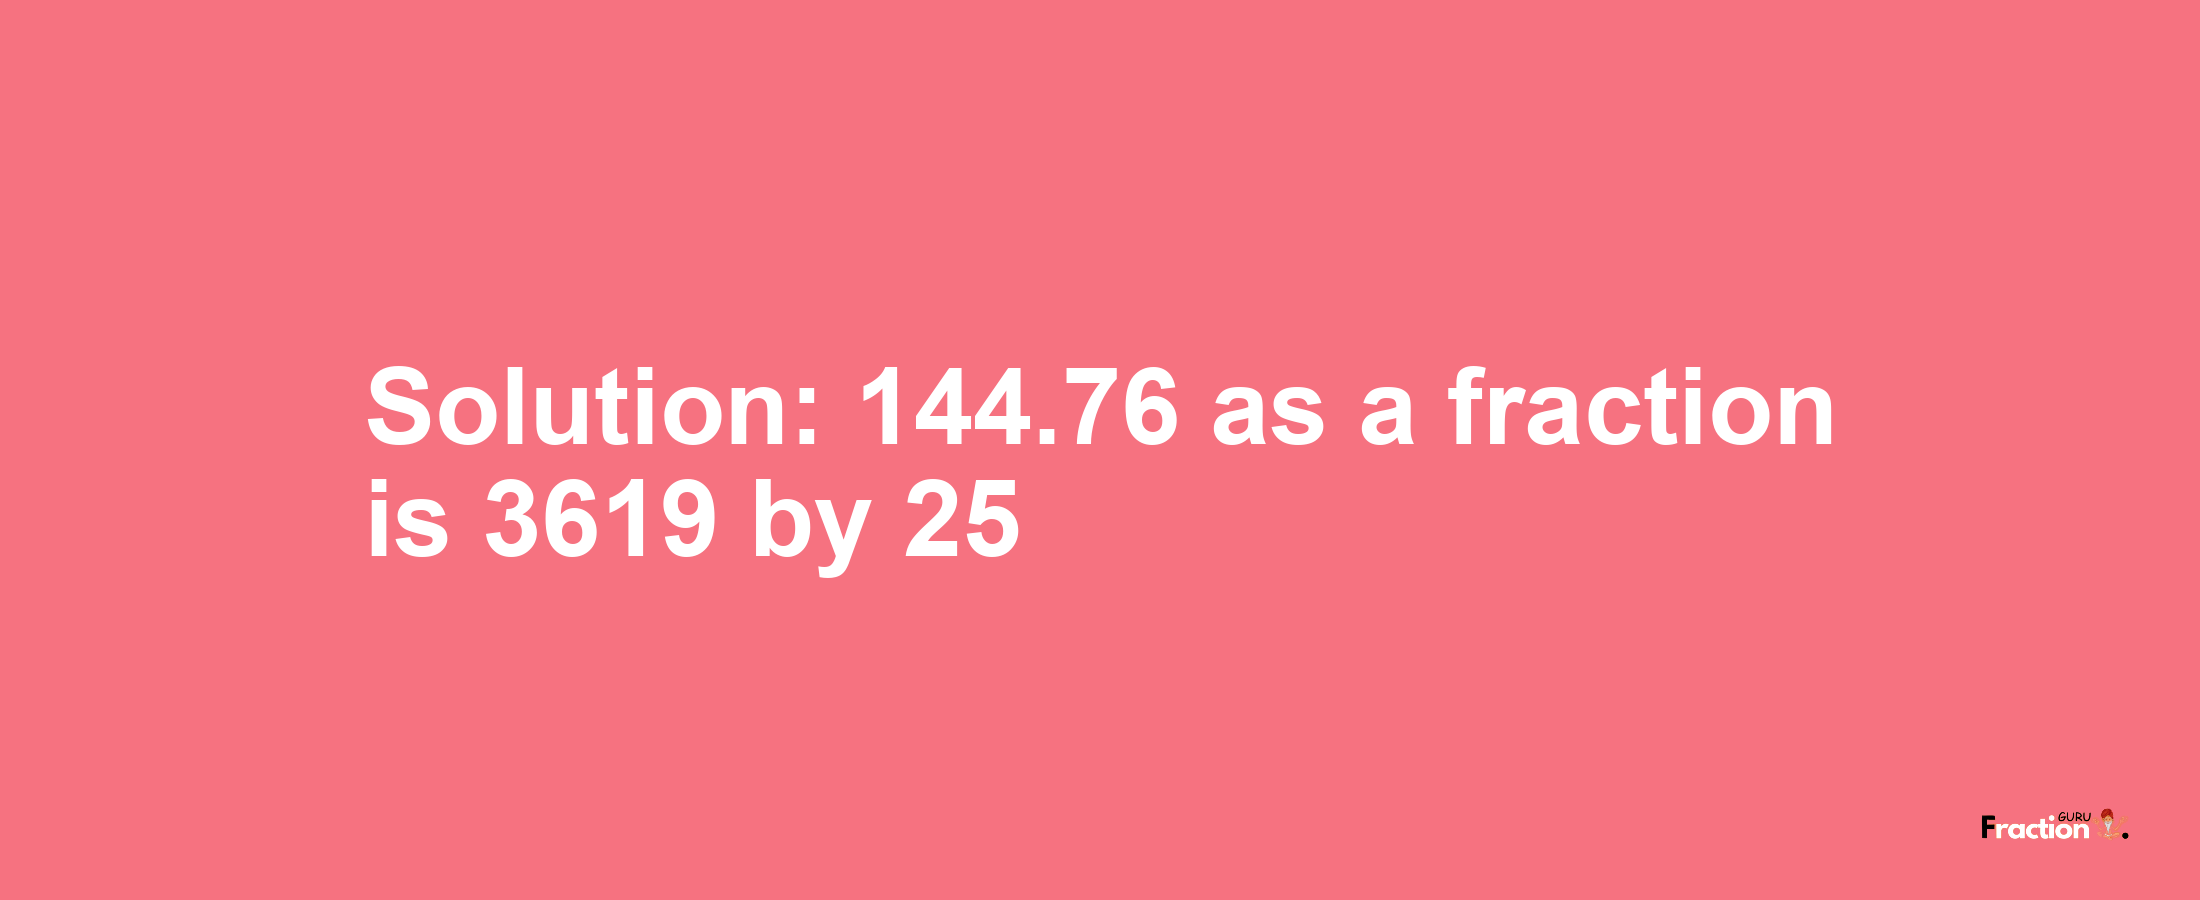 Solution:144.76 as a fraction is 3619/25